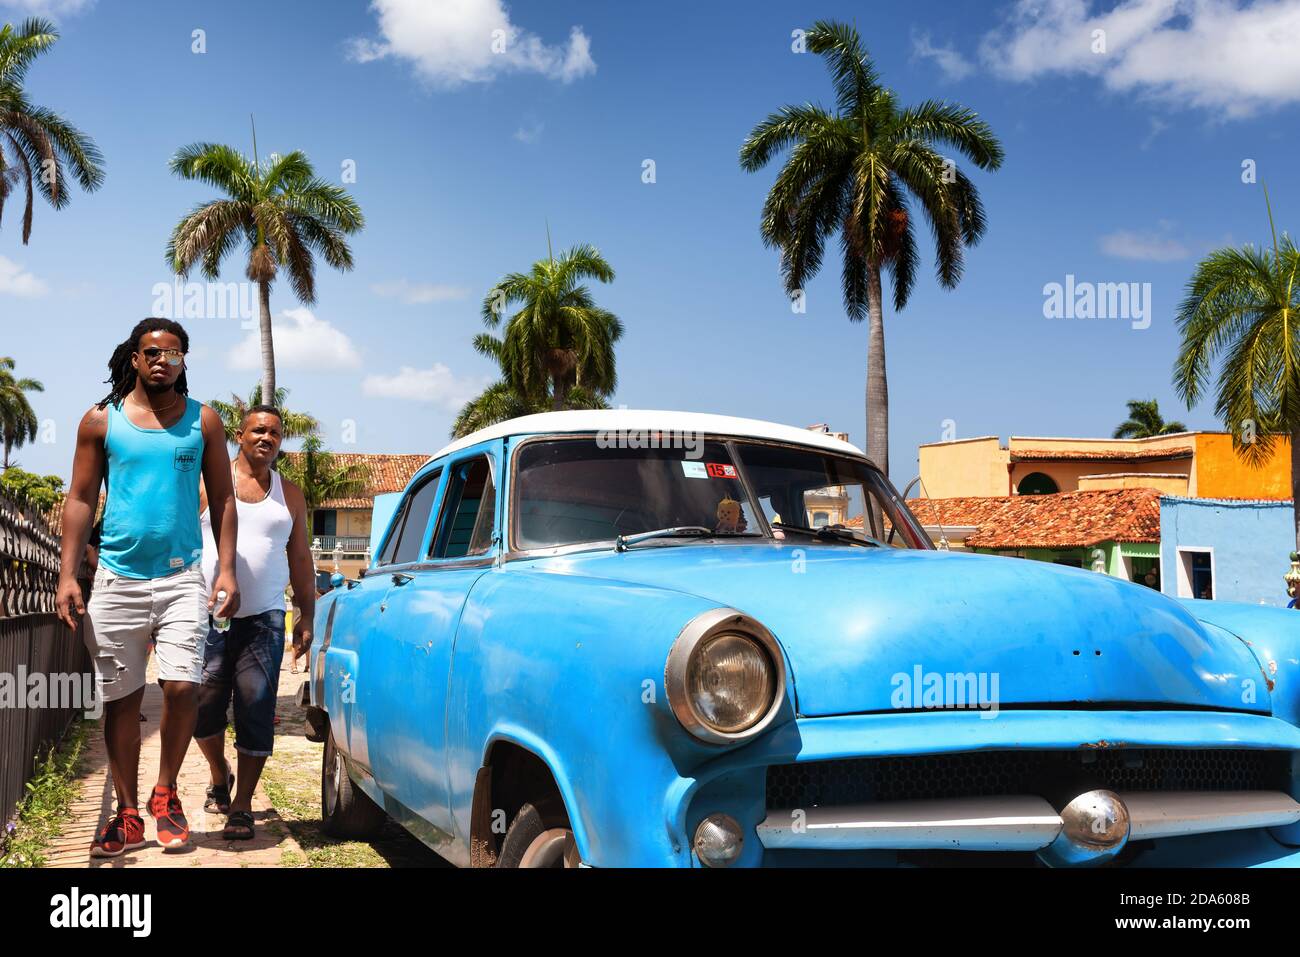 Street scene with a vintage American car and walking cuban people. Trinidad, Cuba. Stock Photo